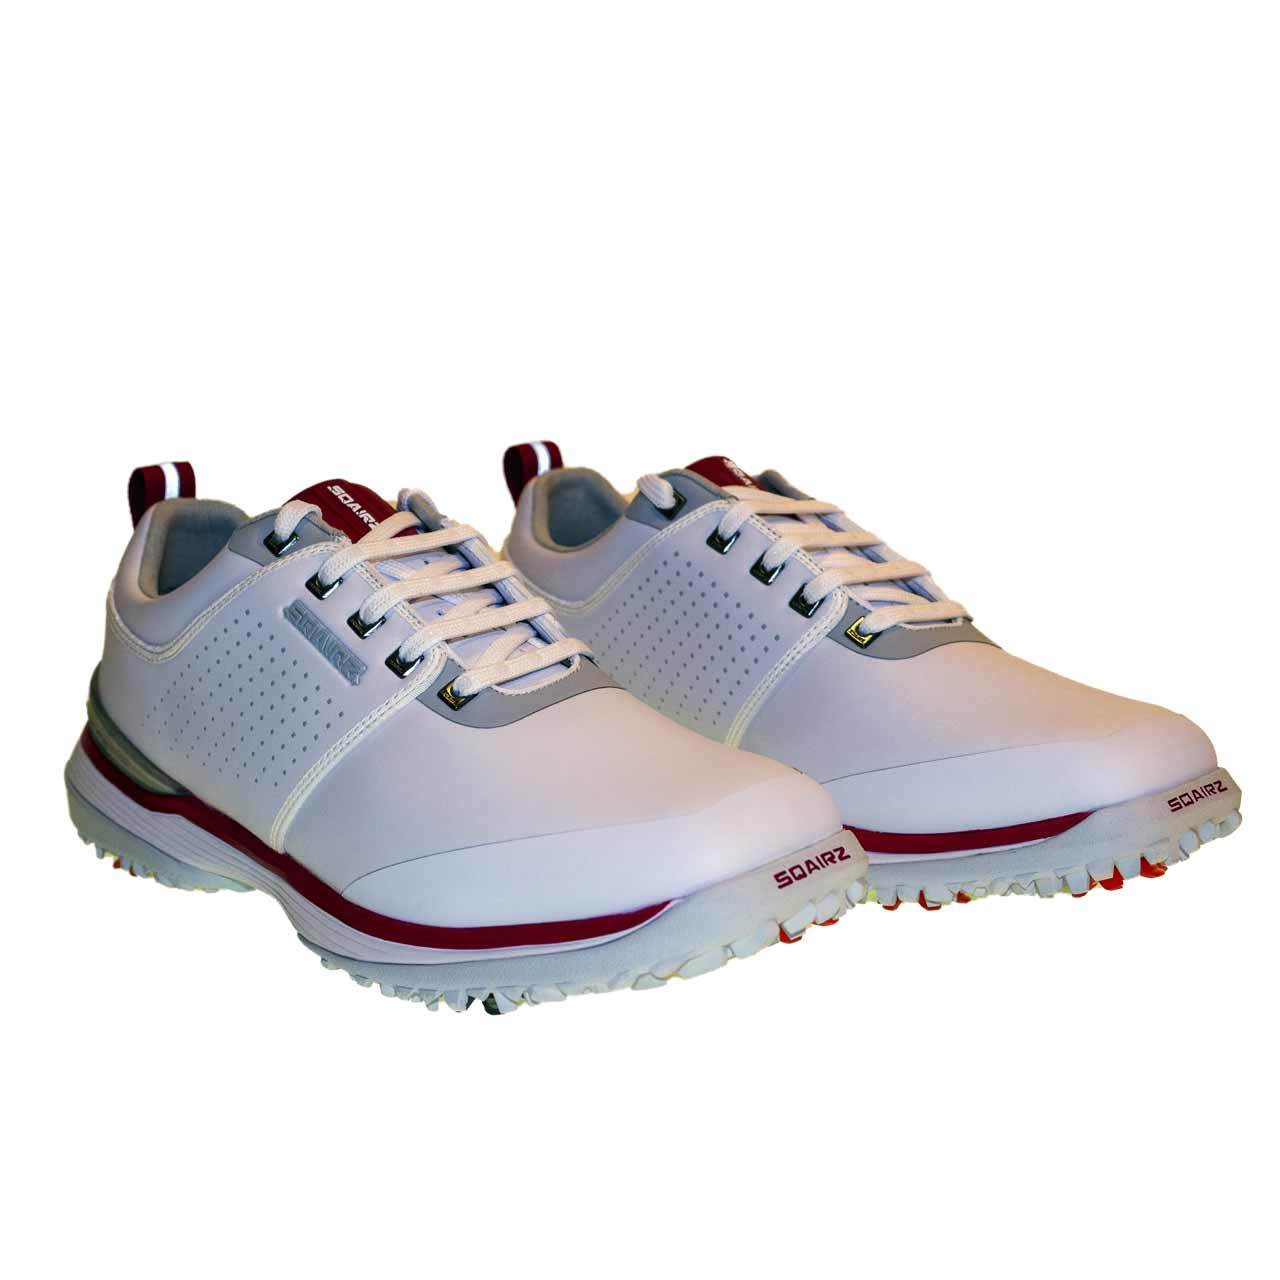 most stable golf shoes